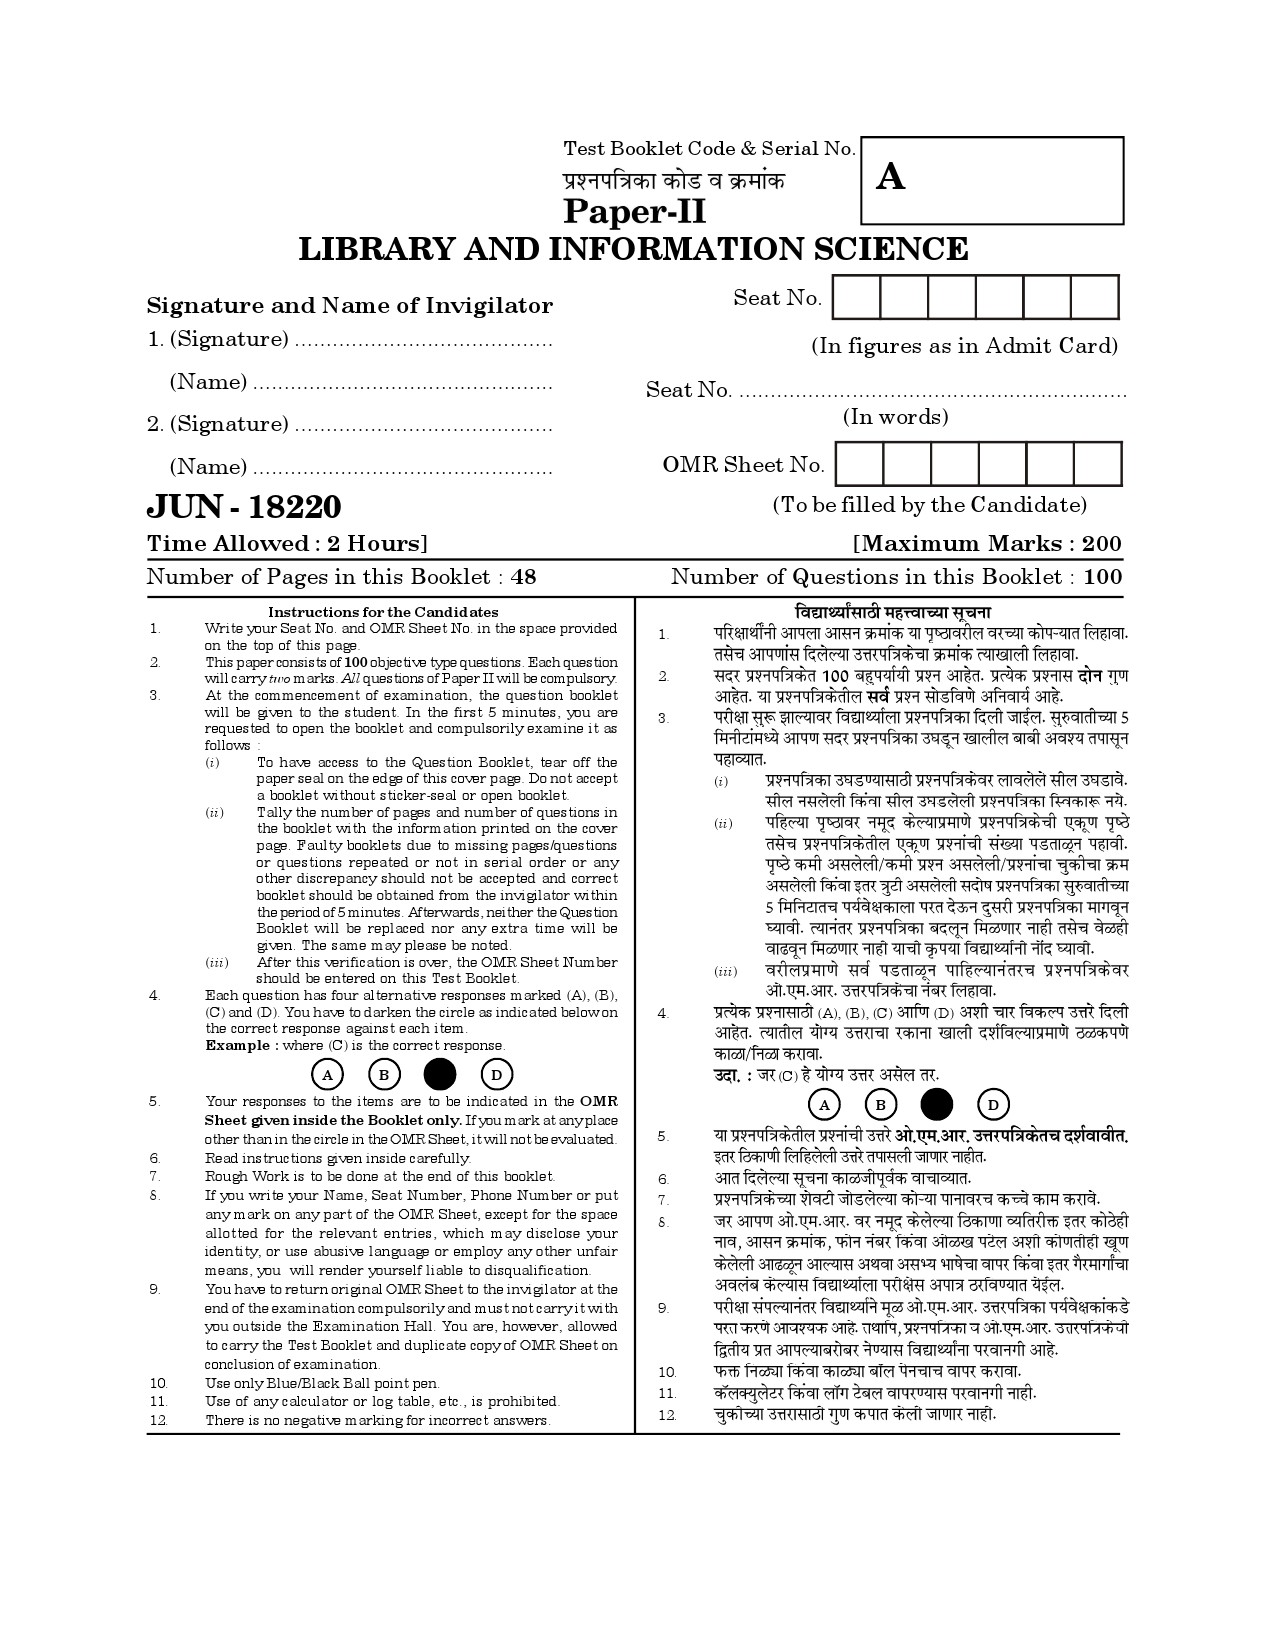 Maharashtra SET Library Information Science Question Paper II June 2020 1